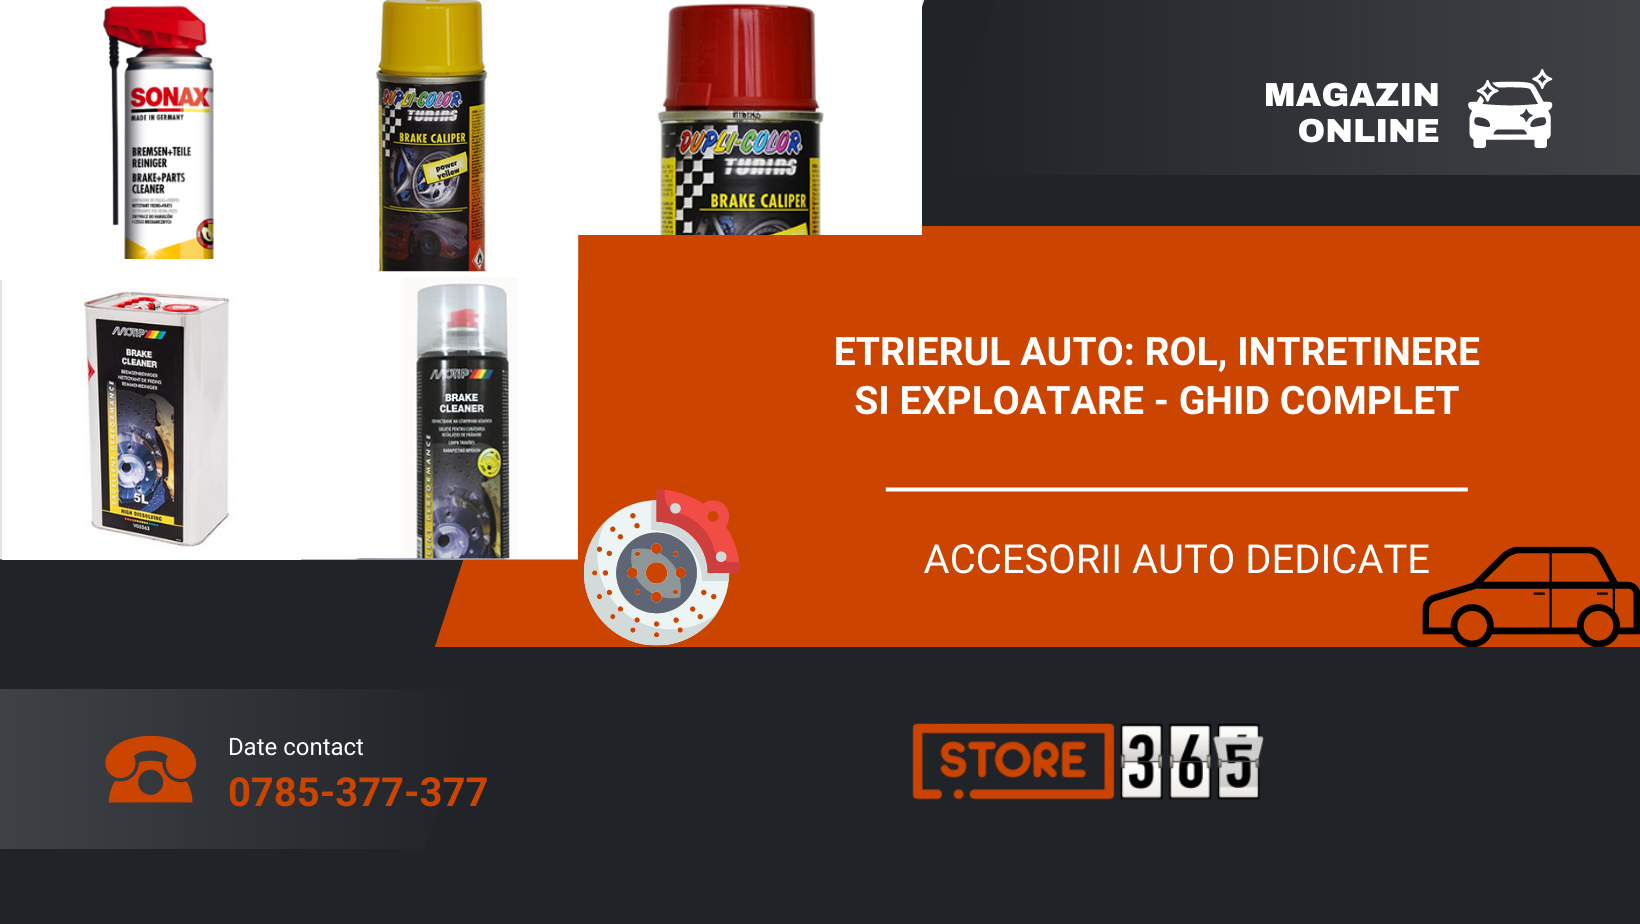 Etrierul Auto: Rol, intretinere si exploatare - ghid complet